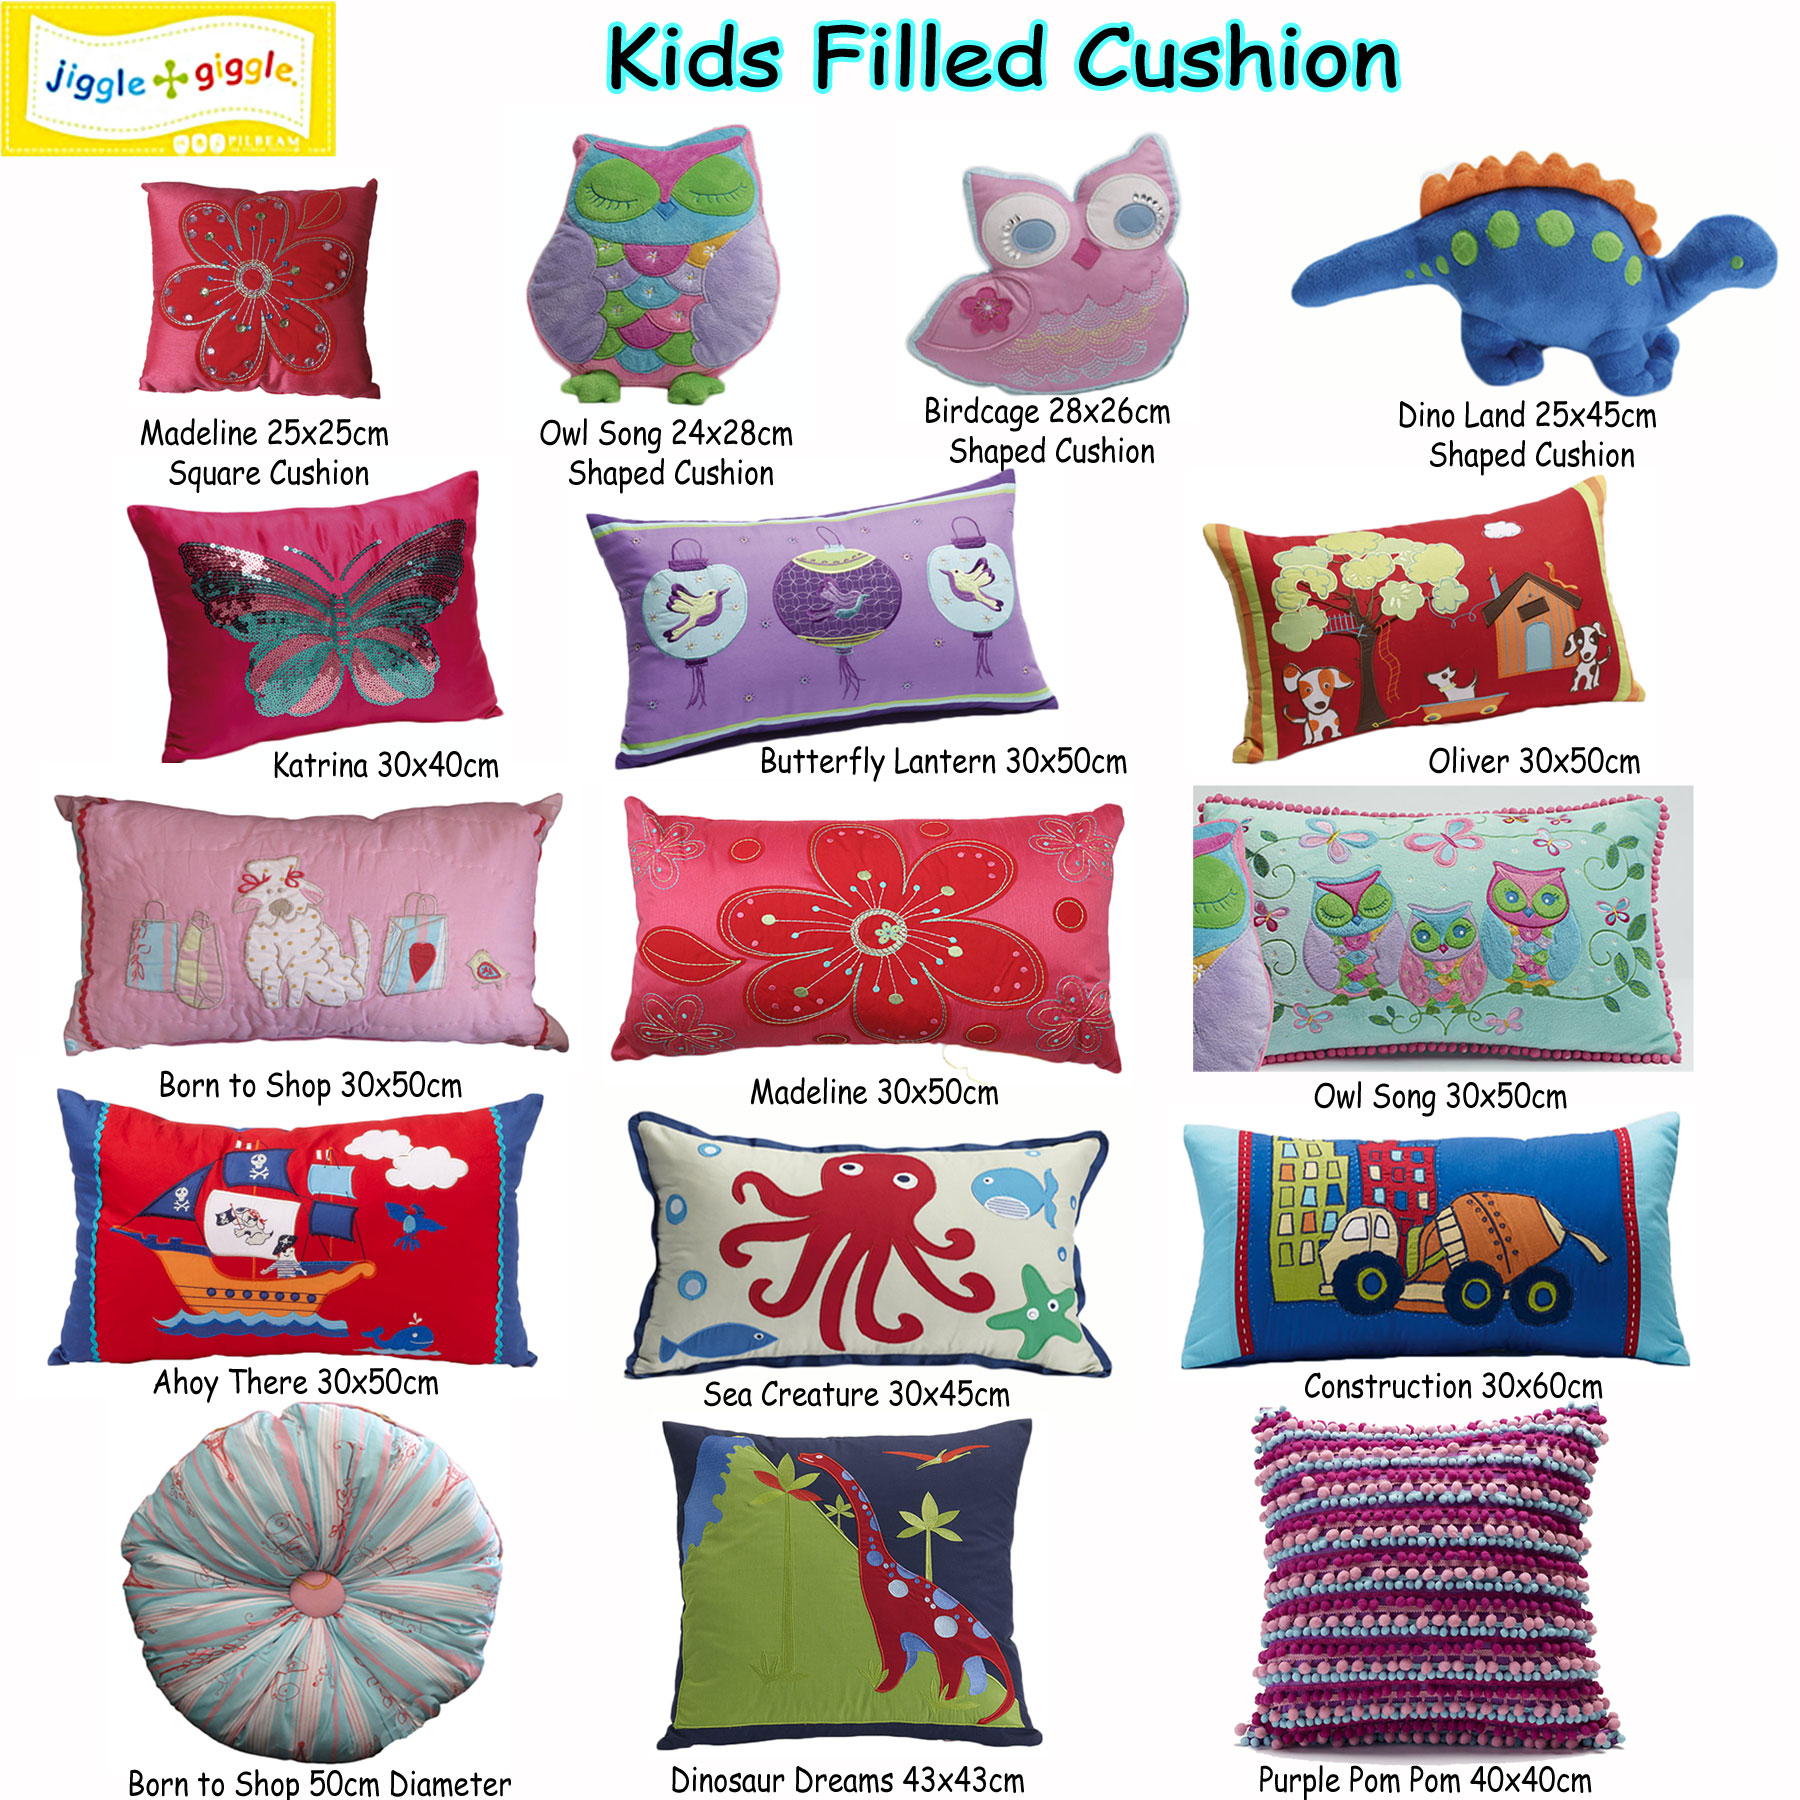 Kids Boys Girls Children Cushion by Jiggle & Giggle - Shaped Round Square Oblong